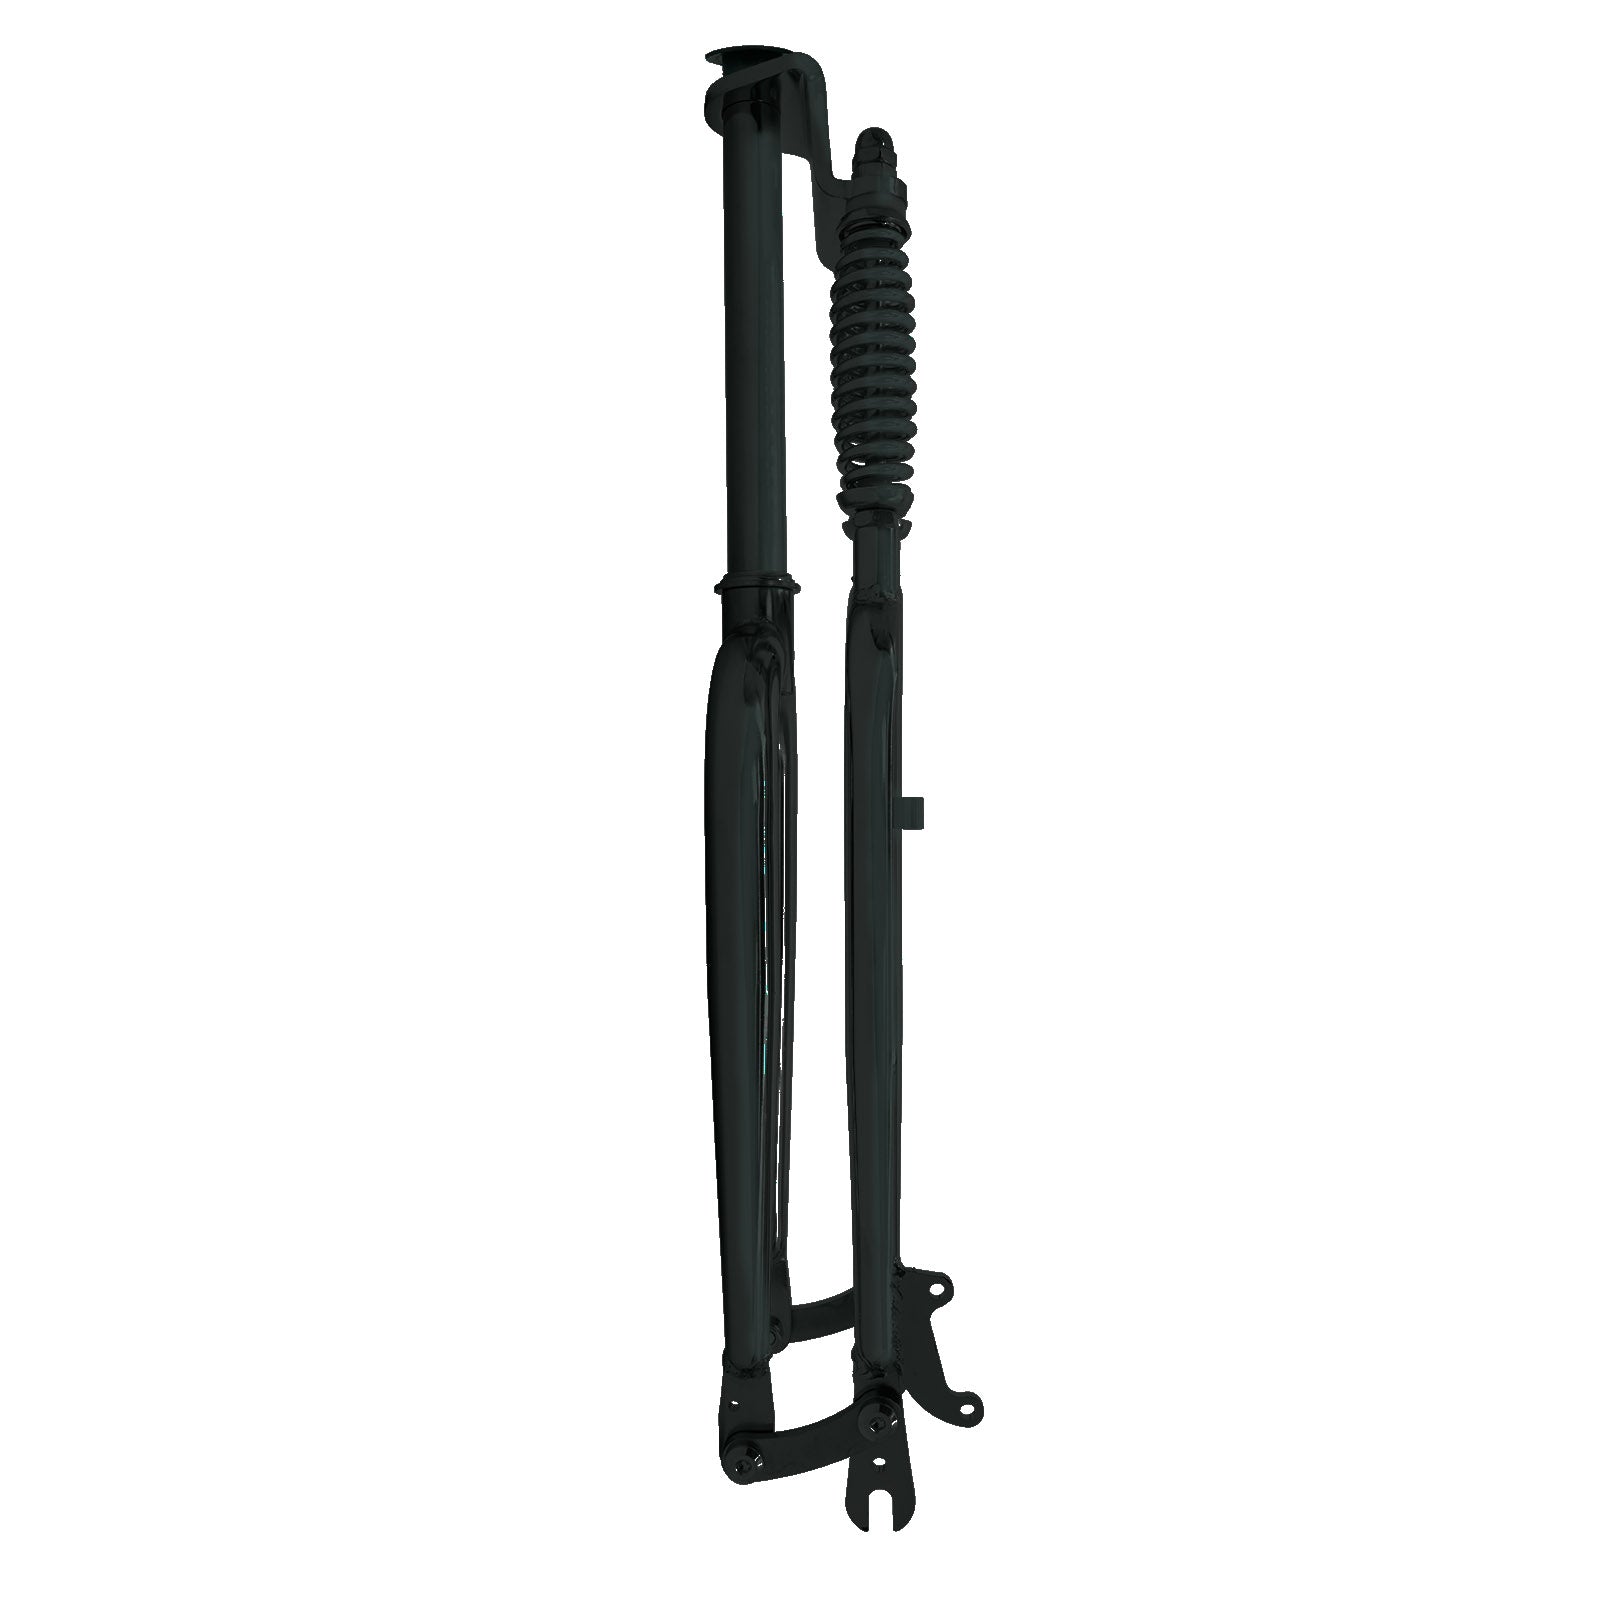 Tracer FK-DS26218100D 26'' Dual Classical Springer Fork 25.4(1")x218mm with Disc Brake.